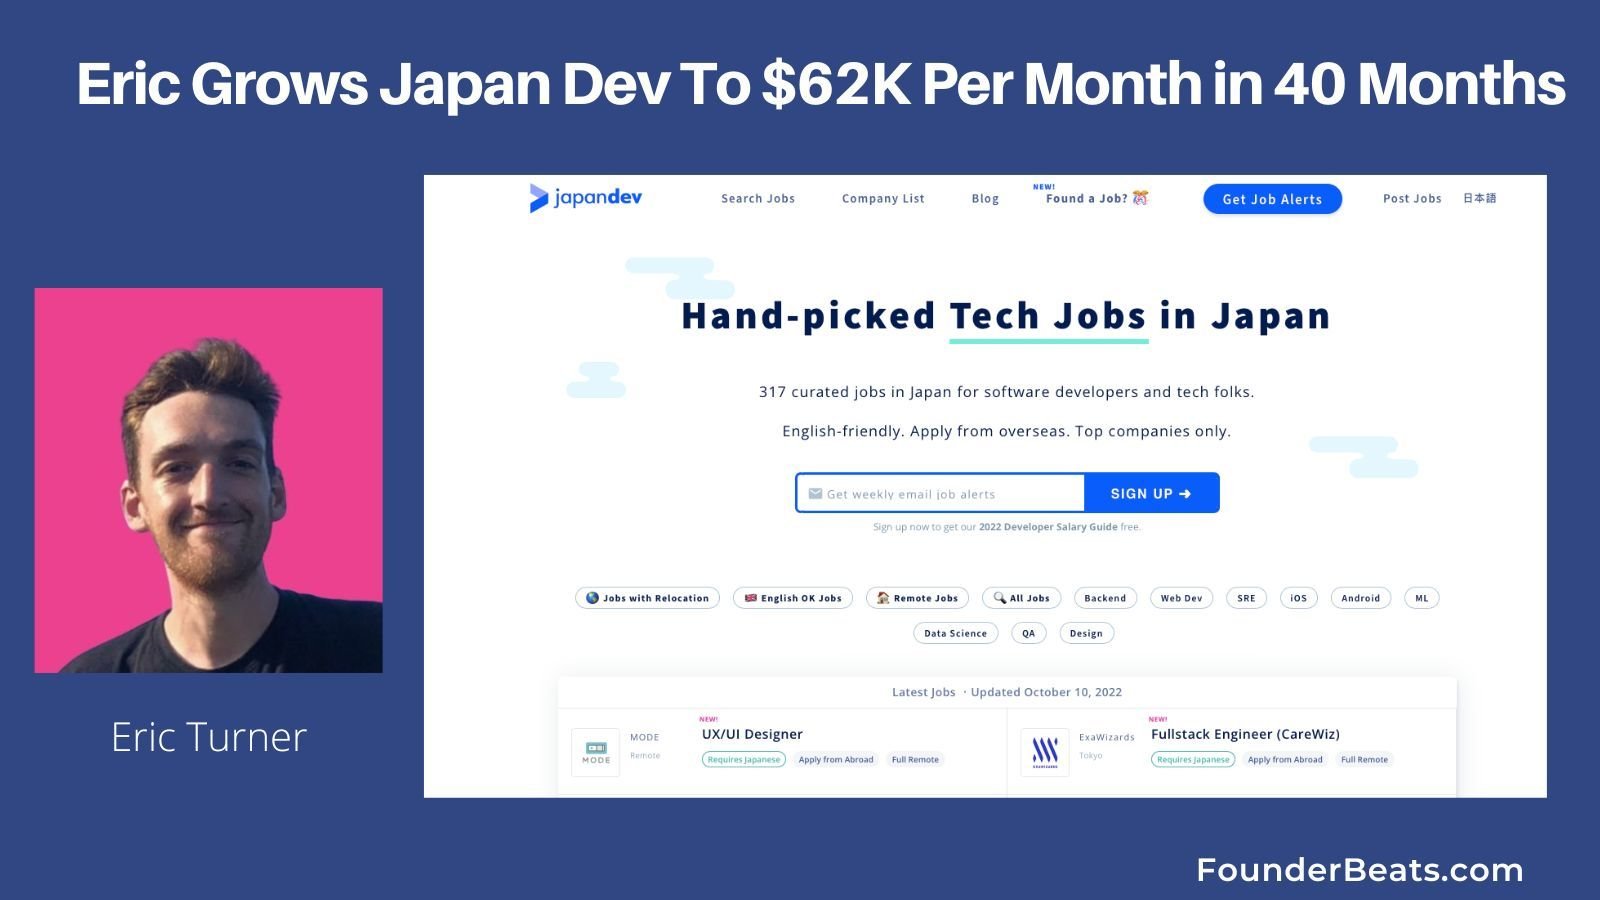 Eric Grows Japan Dev To $62K Per Month in 40 Months